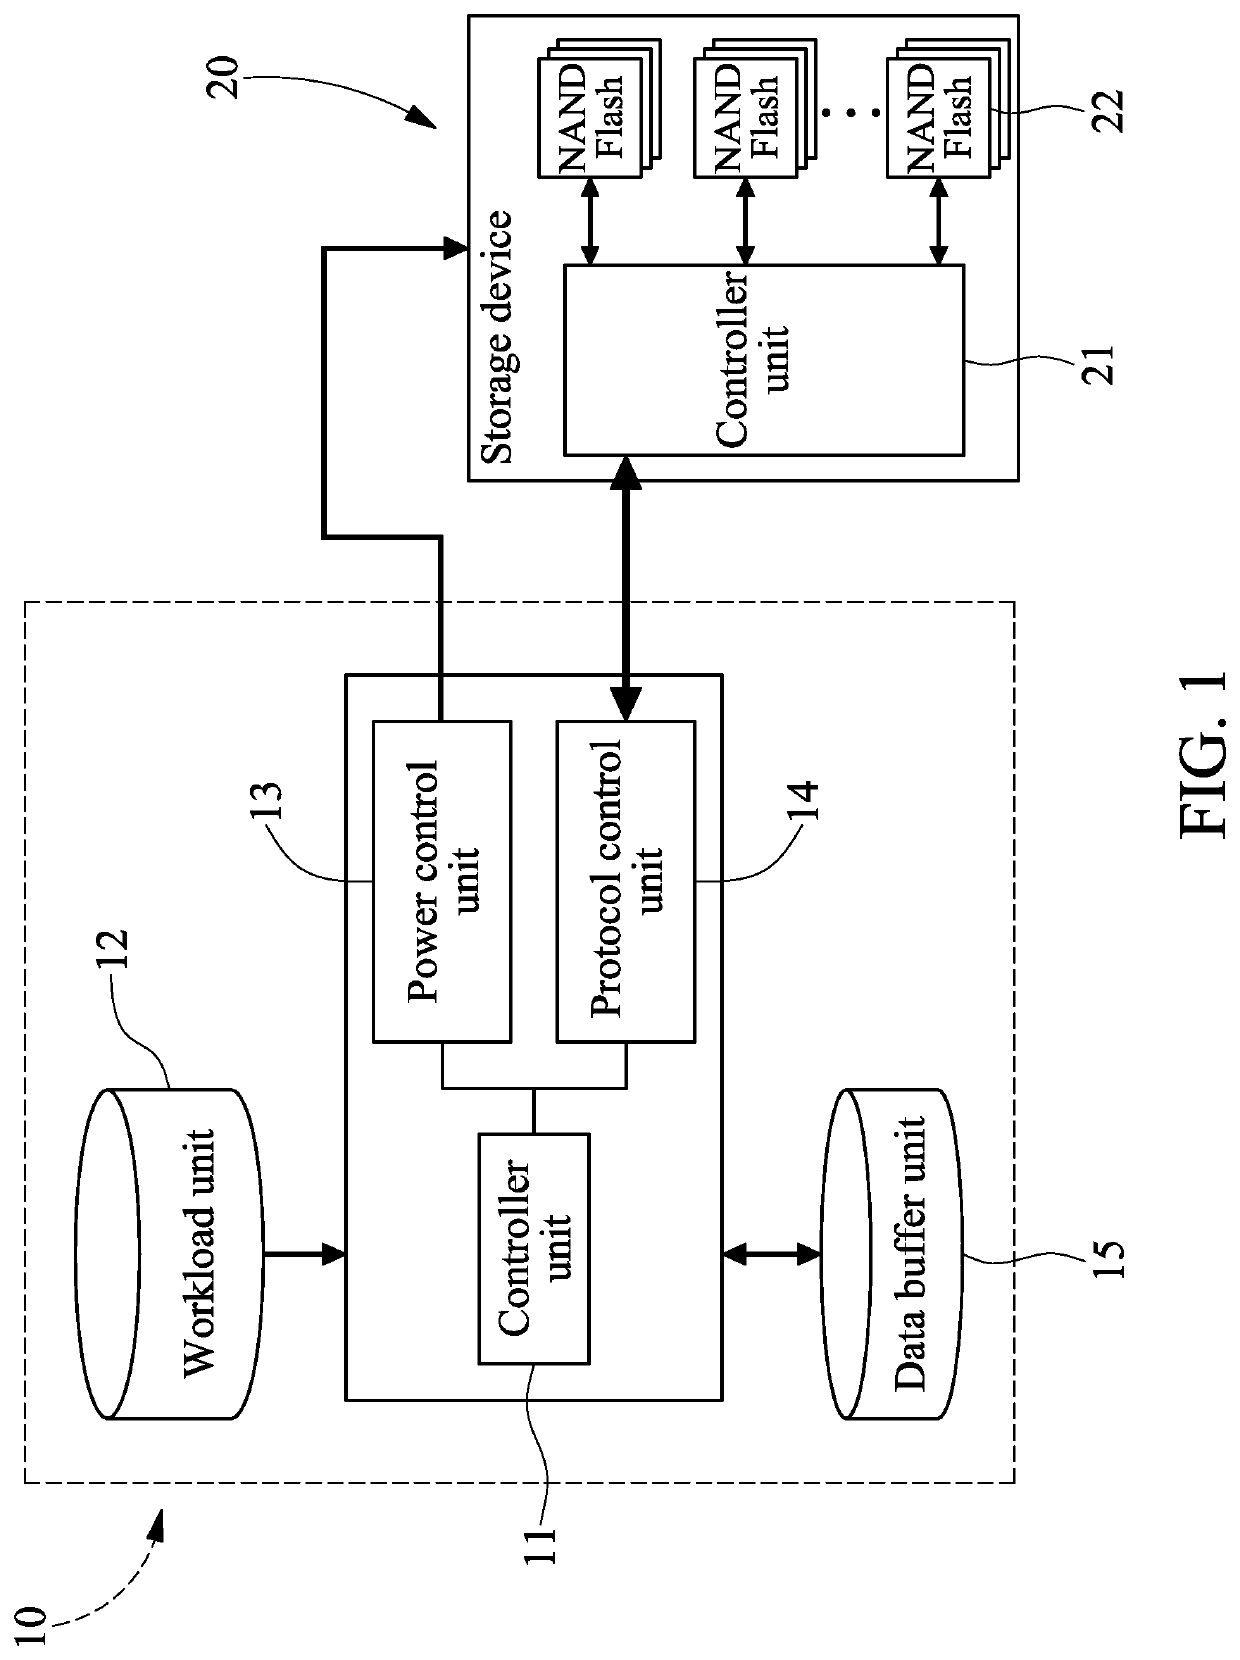 Apparatus and Method for Testing Storage Device in Power Interruptions